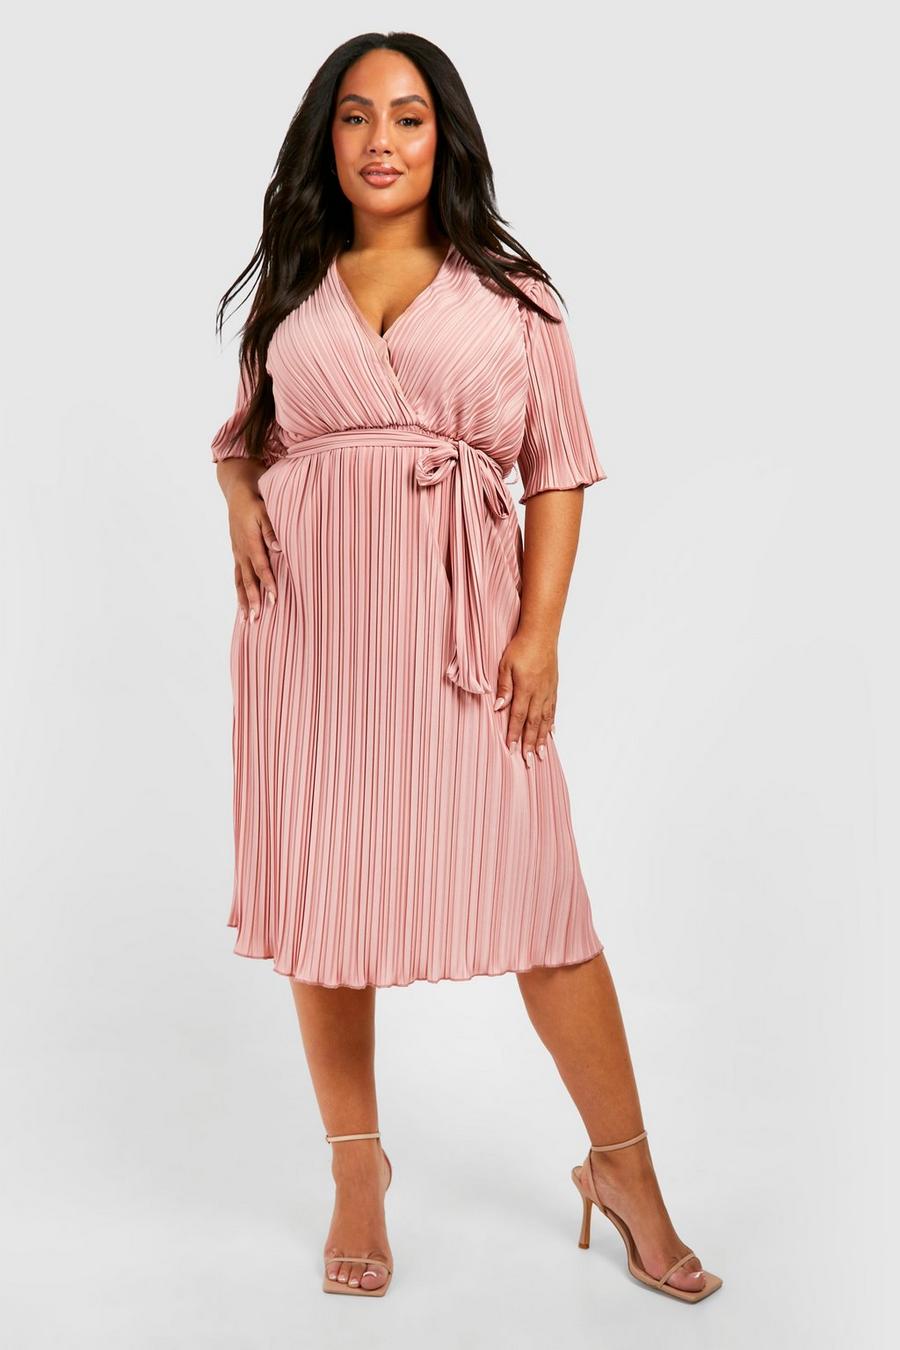 Grande taille - Robe patineuse large plissée à manches larges, Rose pink